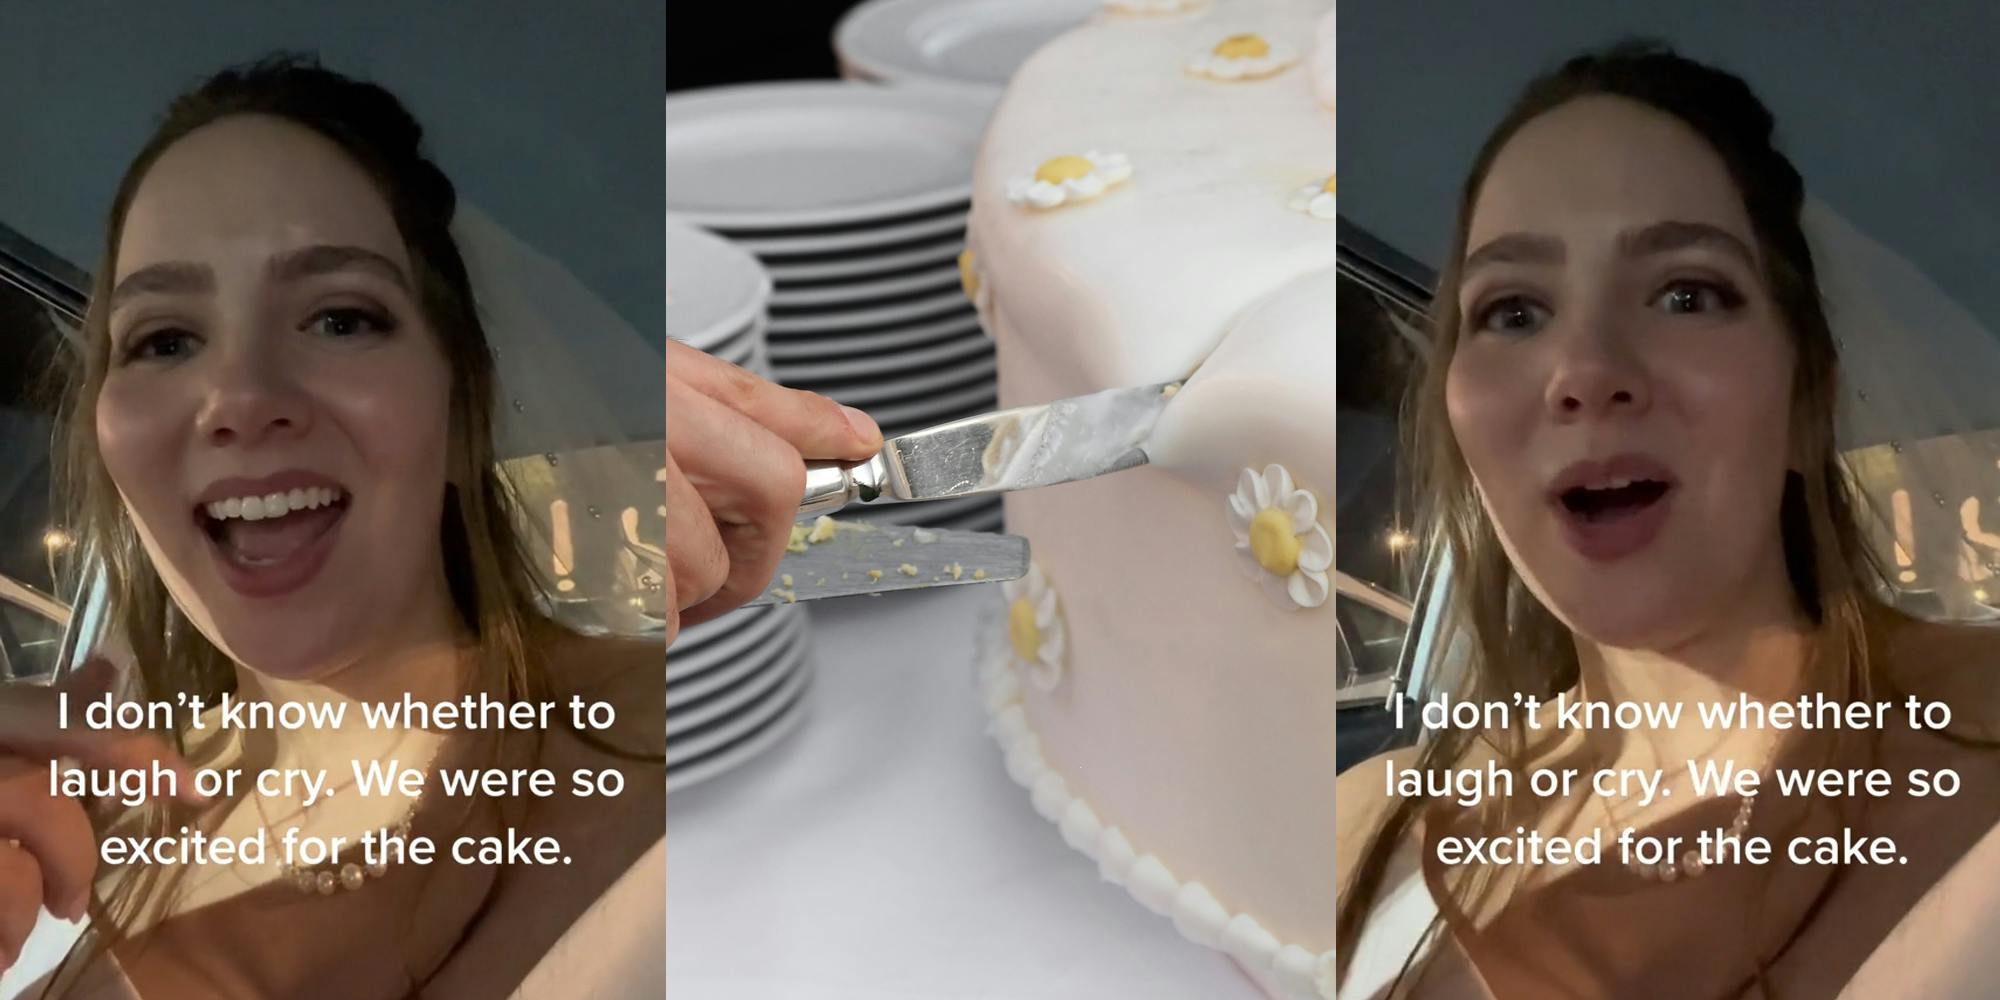 bride speaking in car with caption "I don't know whether to laugh or cry. We were so excited for the cake." (l) hand holding knife cutting into cake (c) bride speaking in car with caption "I don't know whether to laugh or cry. We were so excited for the cake." (r)